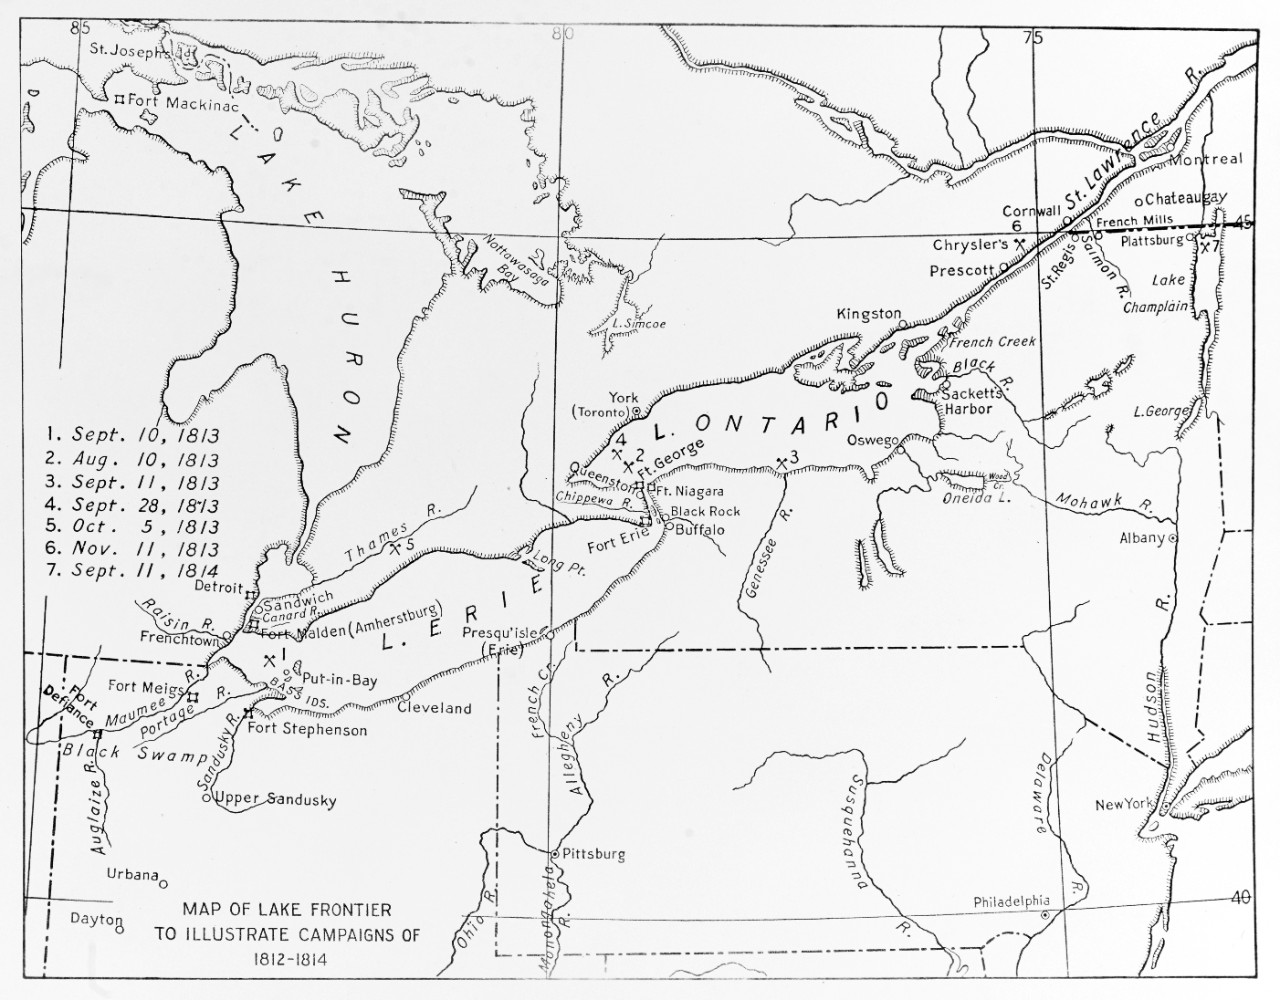 Map of Lake Frontier to illustrate campaigns of 1812-1814.